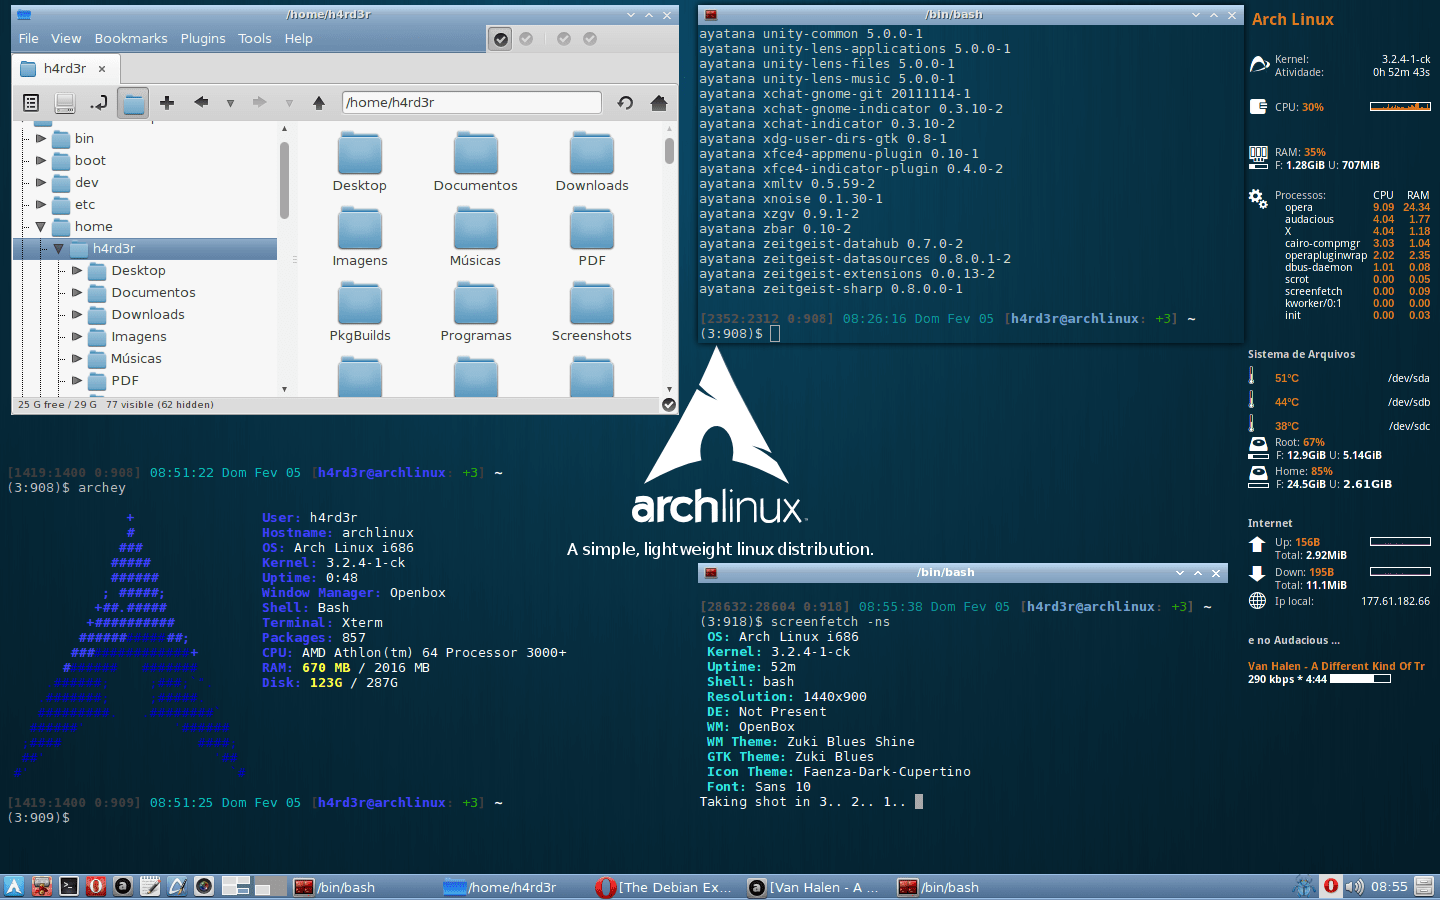 Install arch linux from existing linux (русский) - archwiki